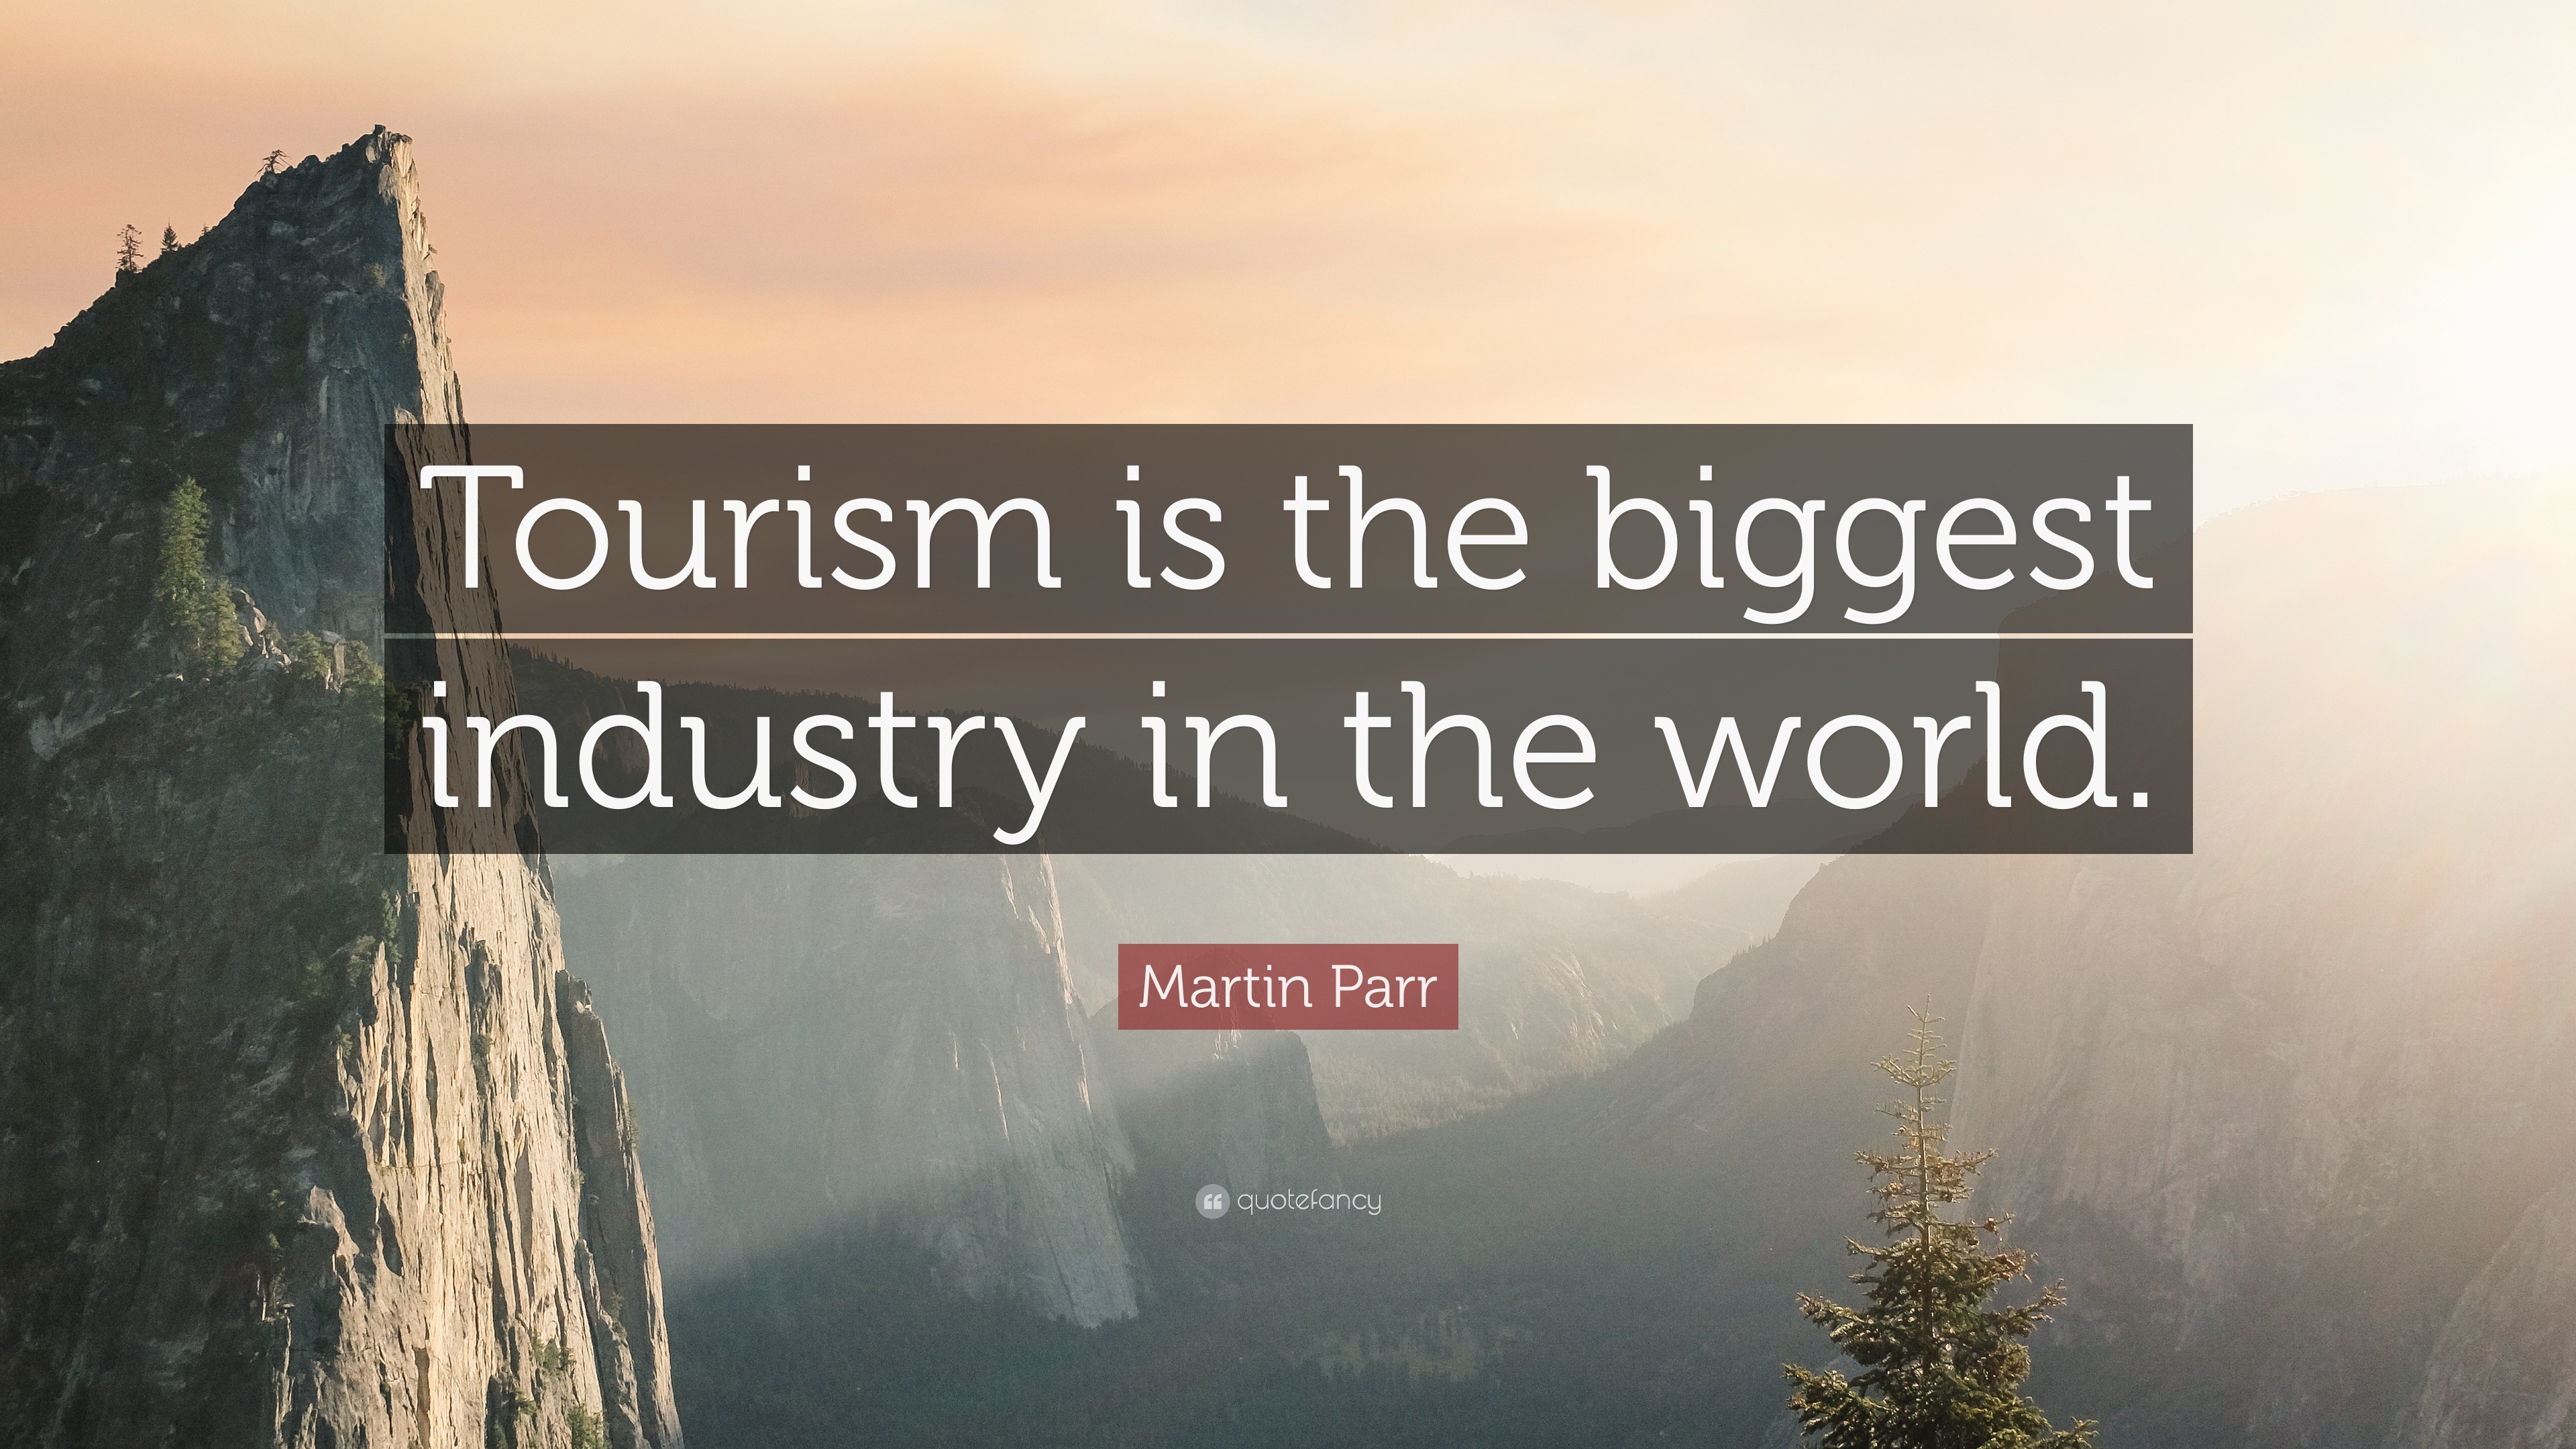 tourism quotes by famous personalities